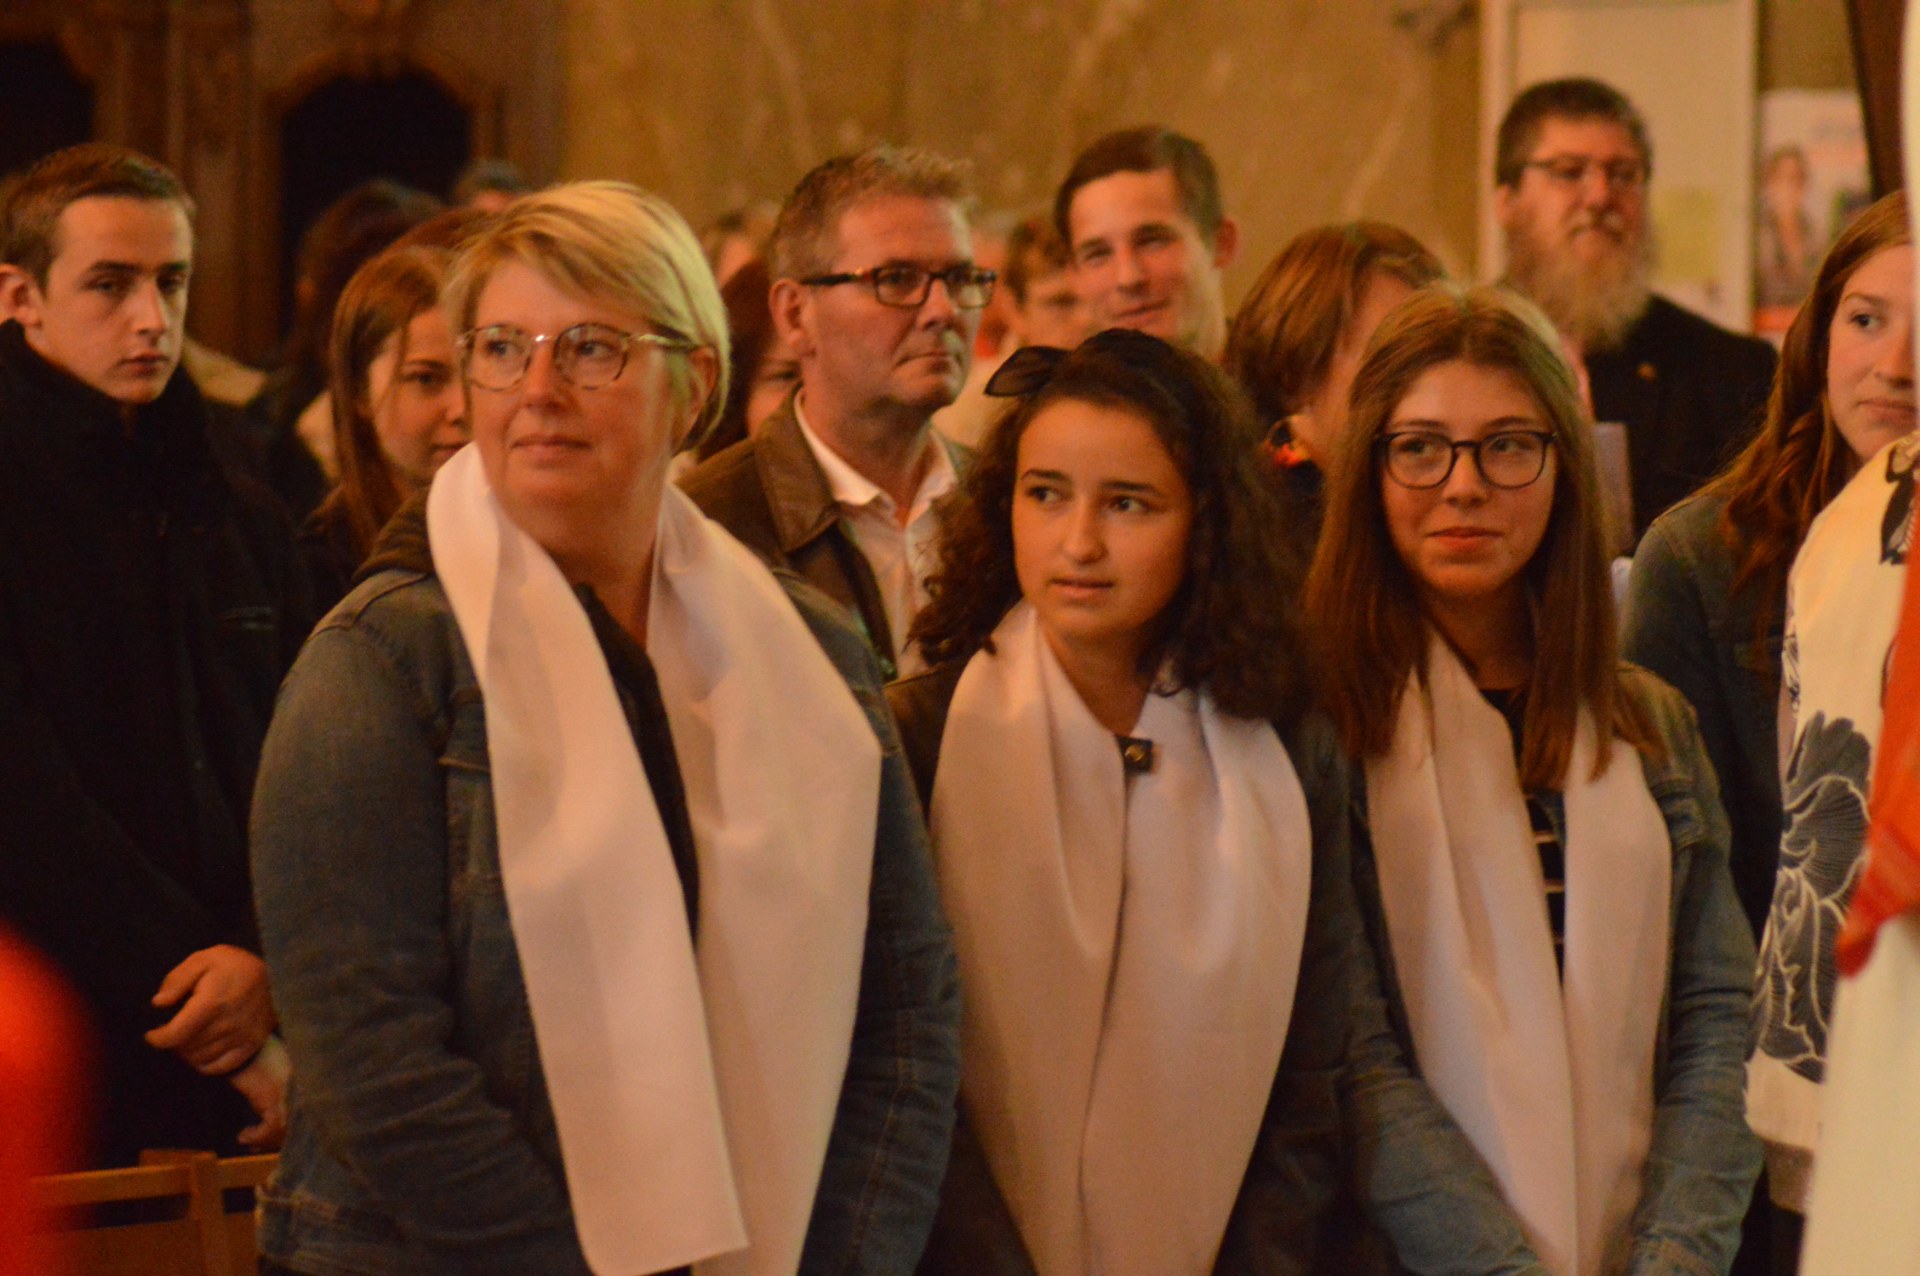 CONFIRMATION SOLESMES2019 19